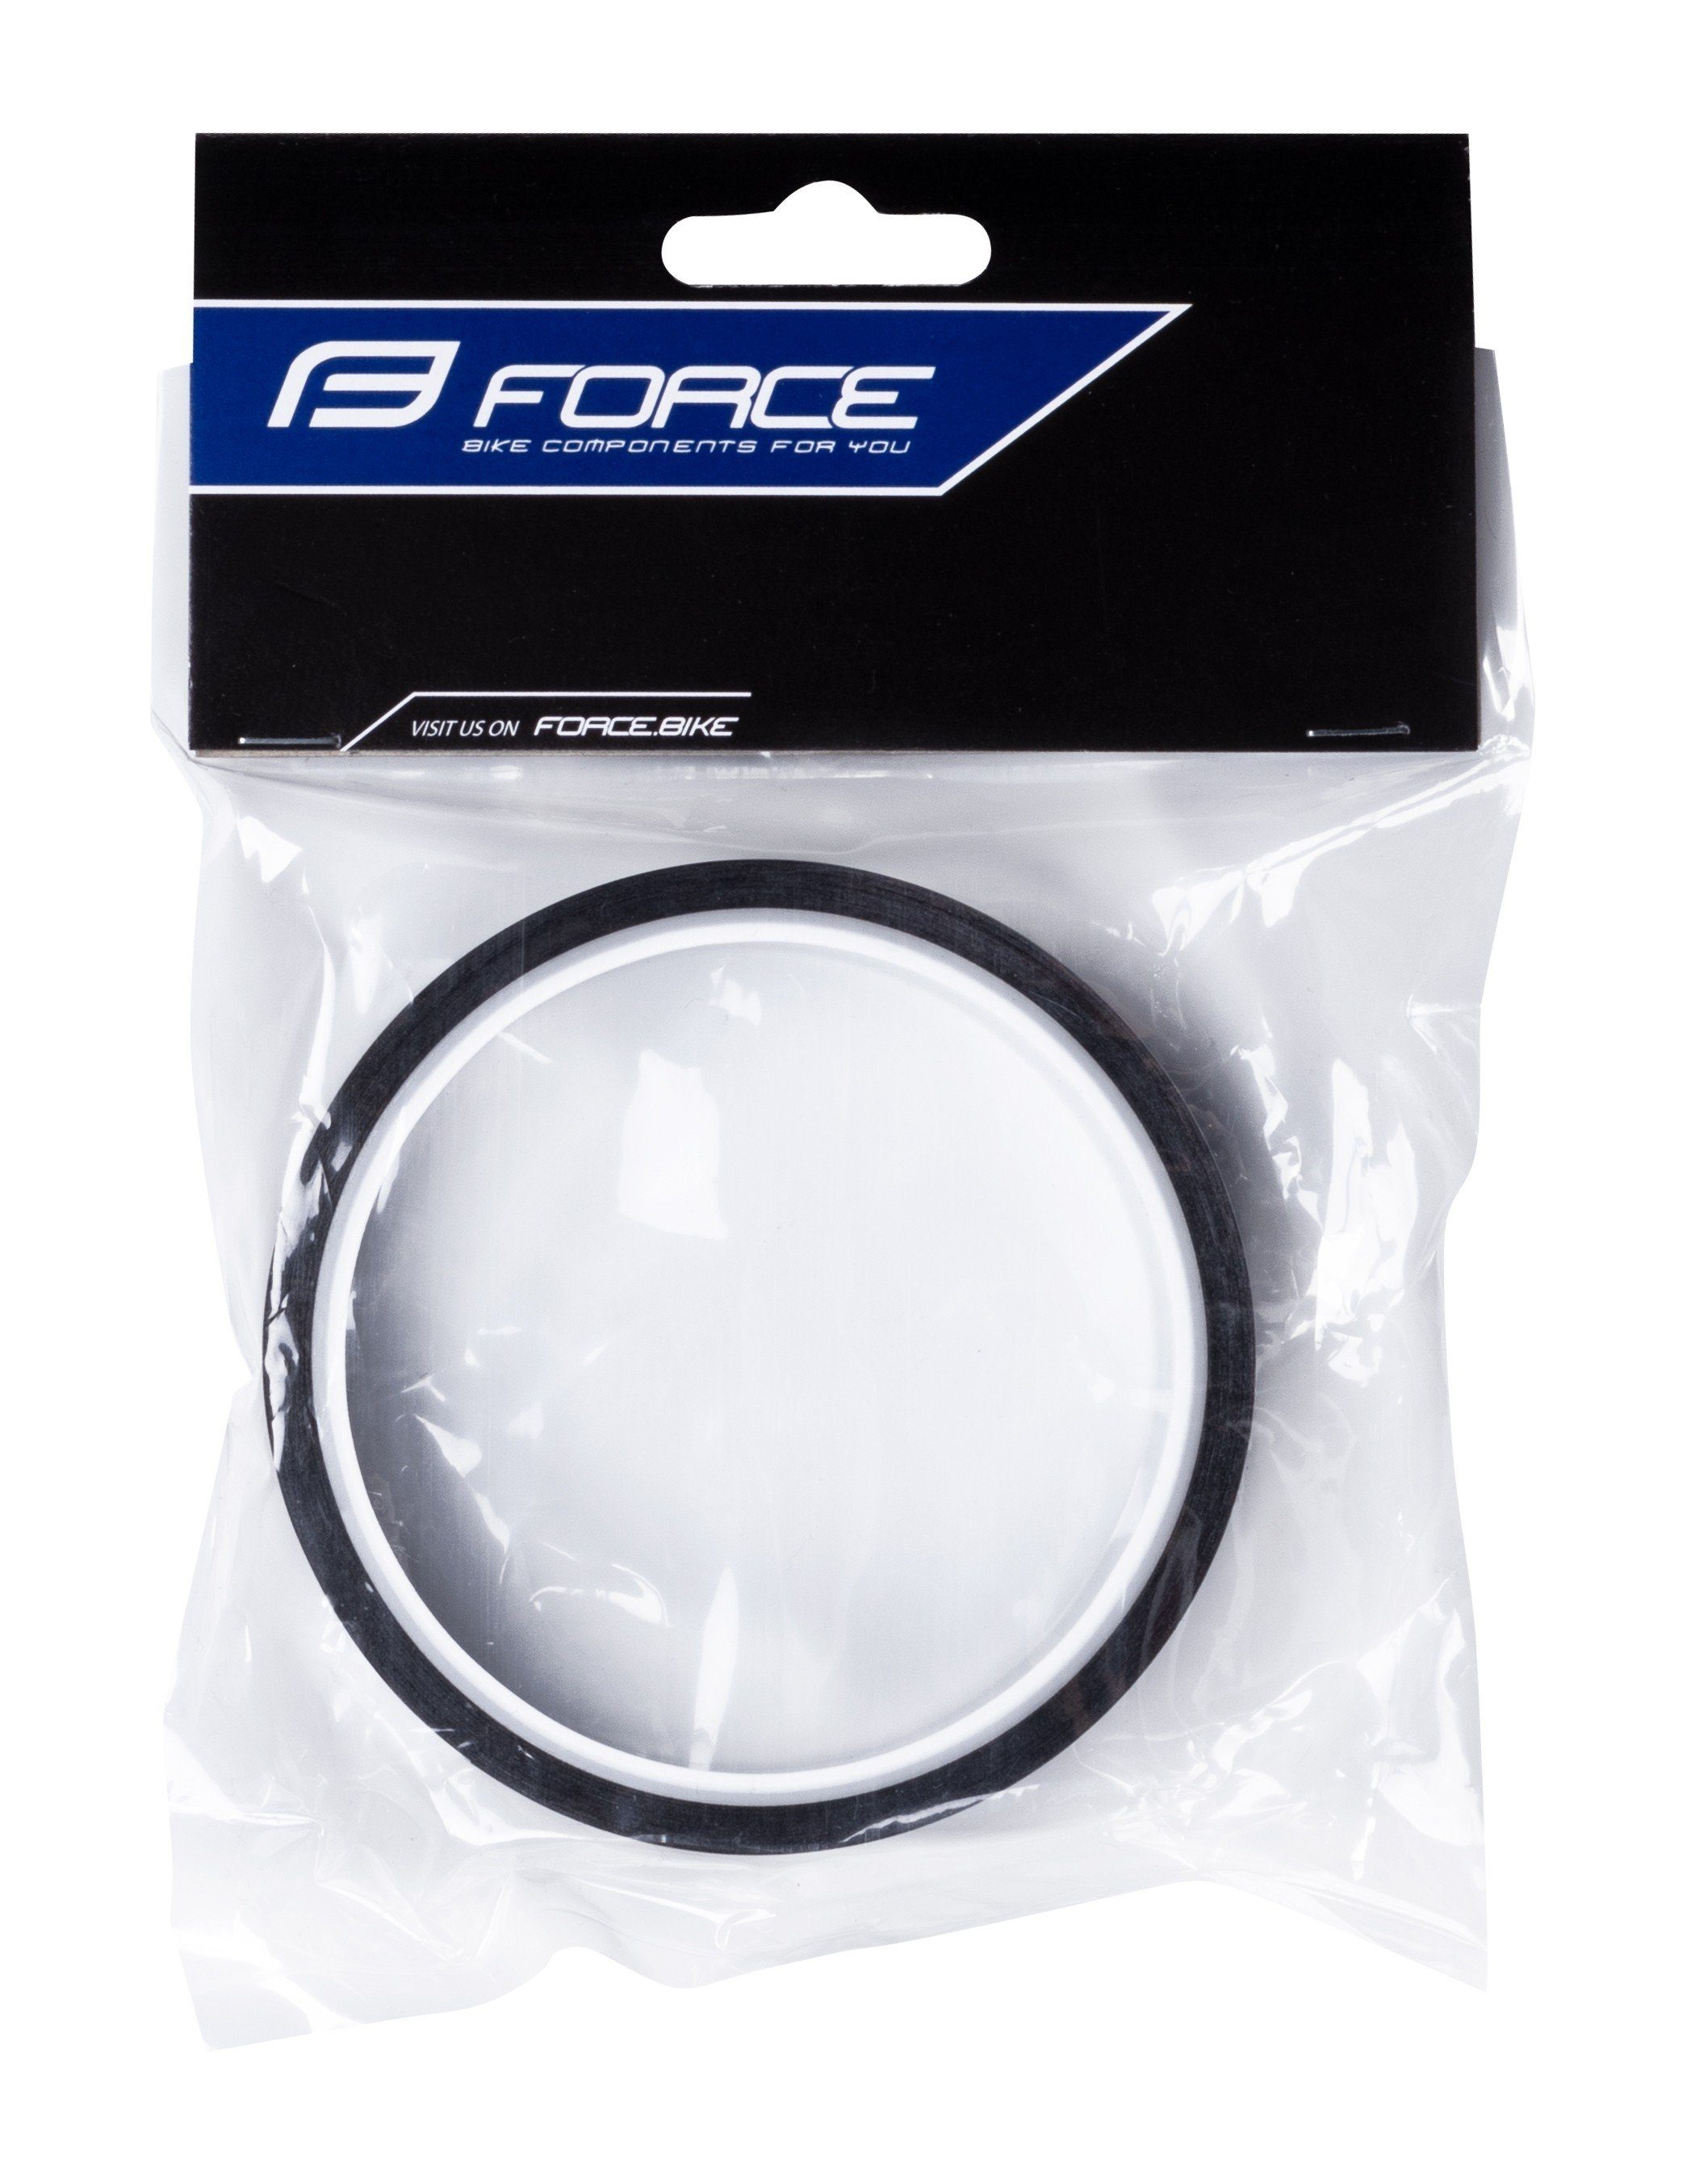 25mm tape Tubeless self-adhesive FORCE Fahrradschlauch rim x FORCE 10m